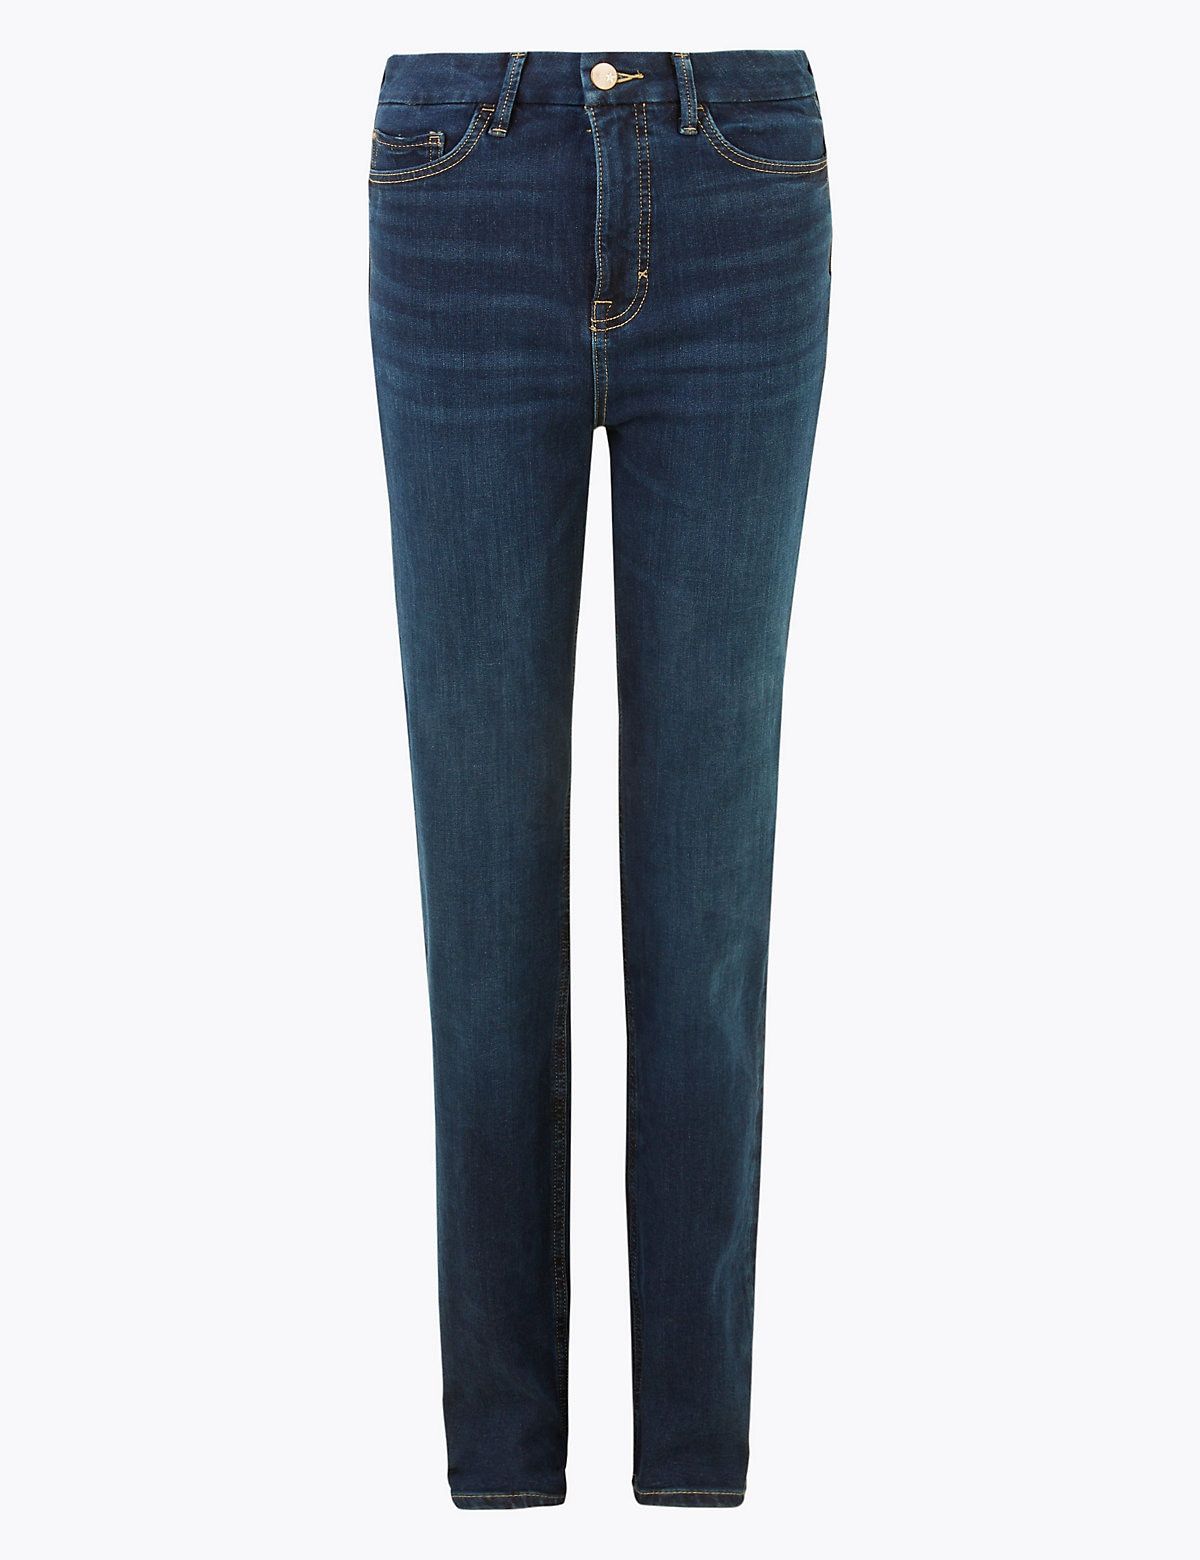 m&s relaxed fit jeans